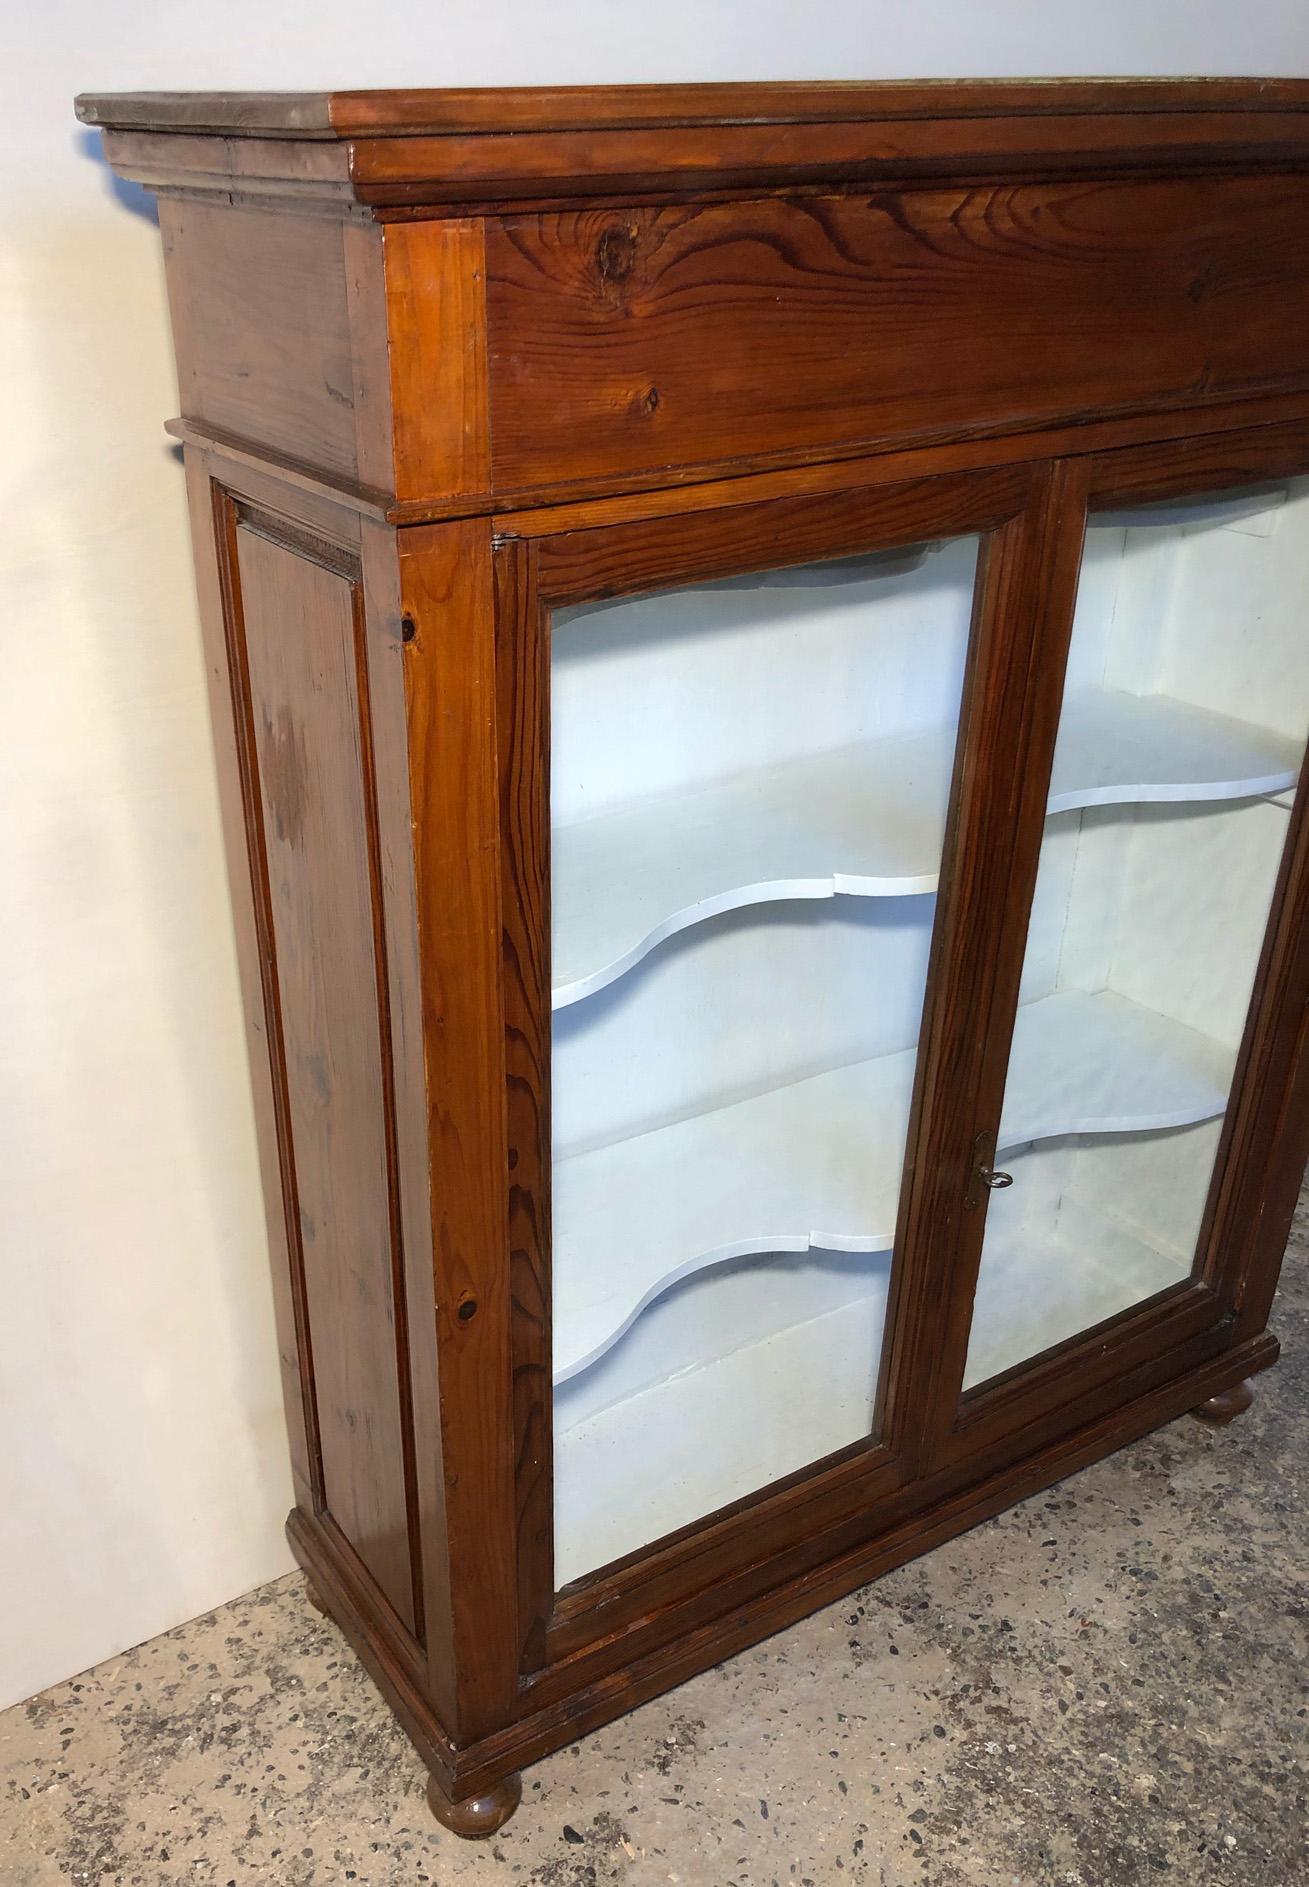 Showcase from 1880 in Italian larch, internal part color white, with three internal shelves
Original paint.
They will be delivered in a specific wooden case for export, packed in bubble wrap.
Comes from an old country house in the Chianti area of